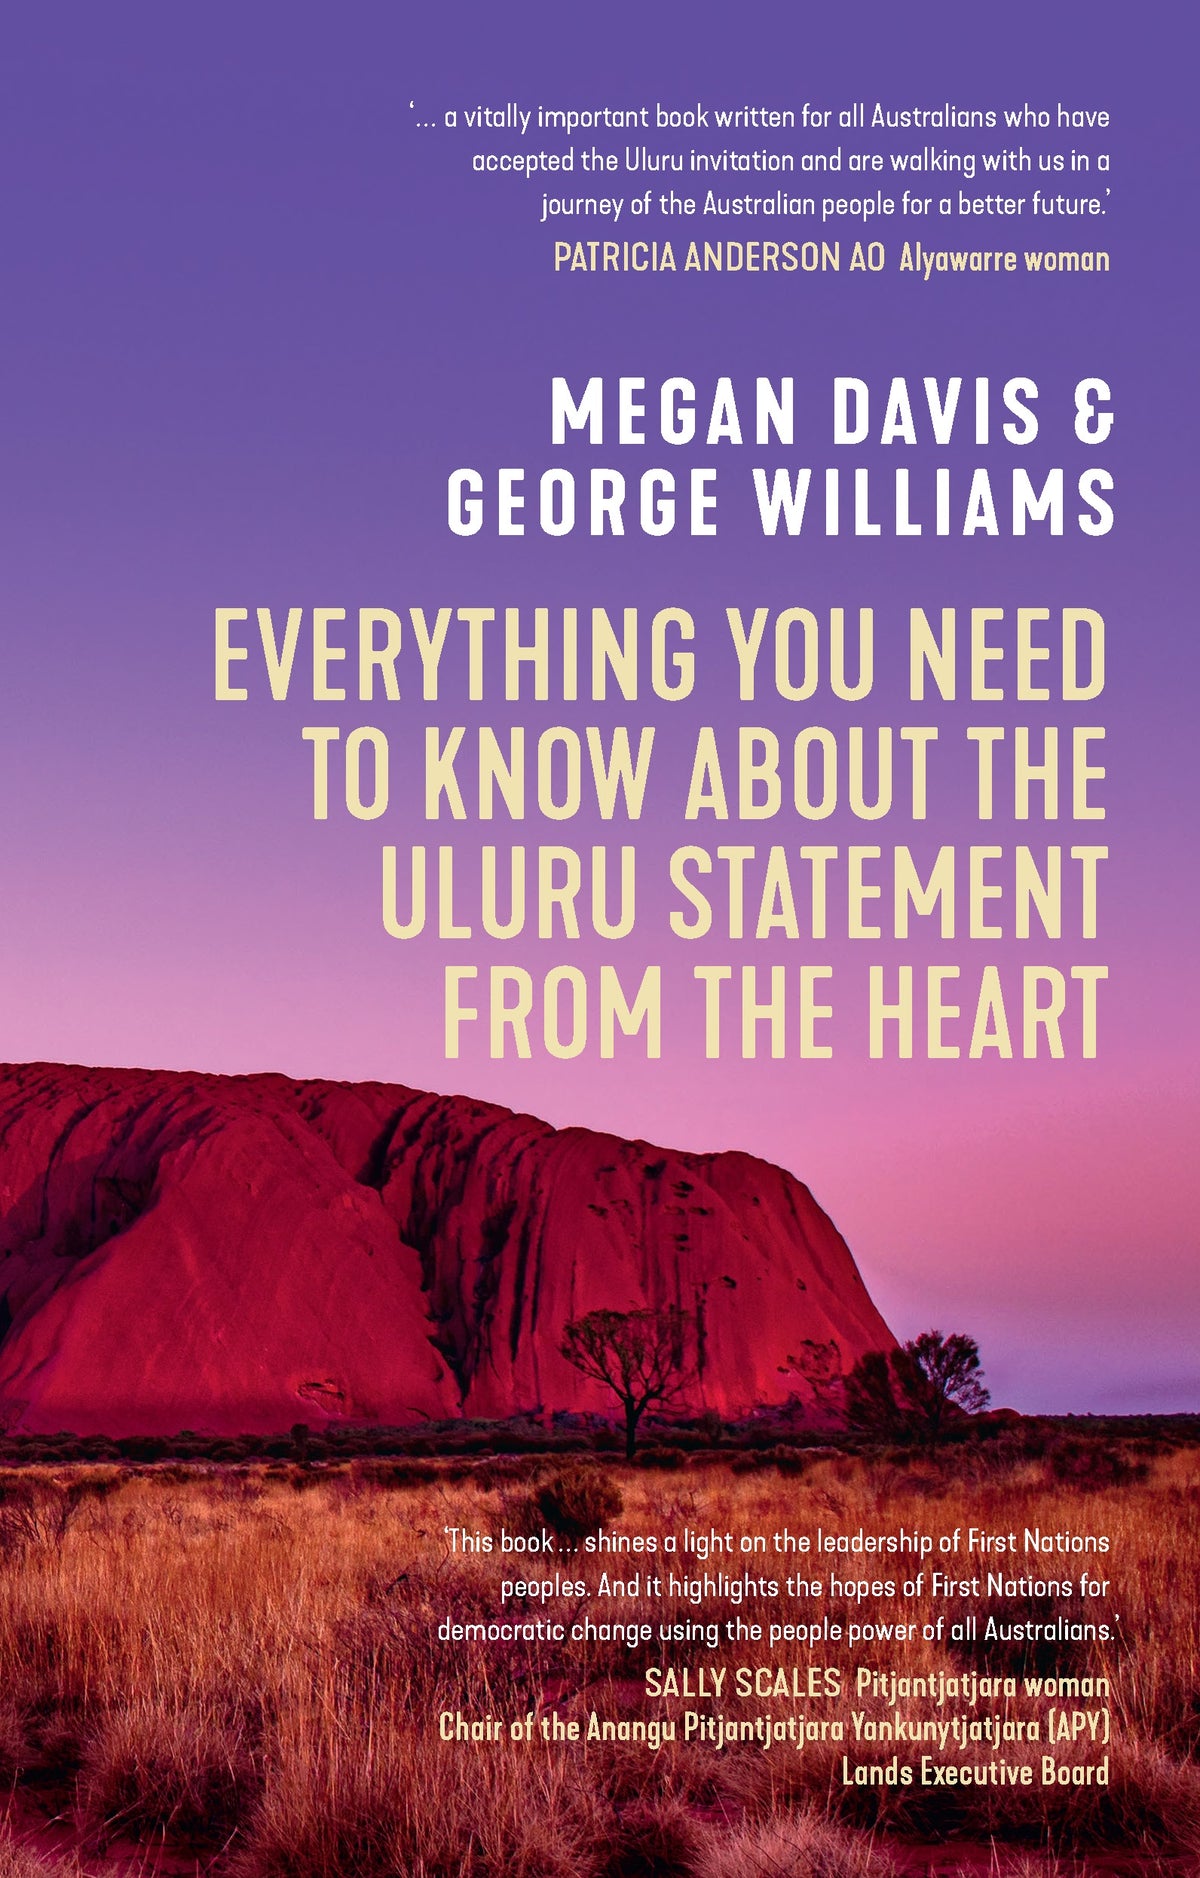 EVERYTHING YOU NEED TO KNOW ABOUT THE ULURU STATEMENT FROM THE HEART